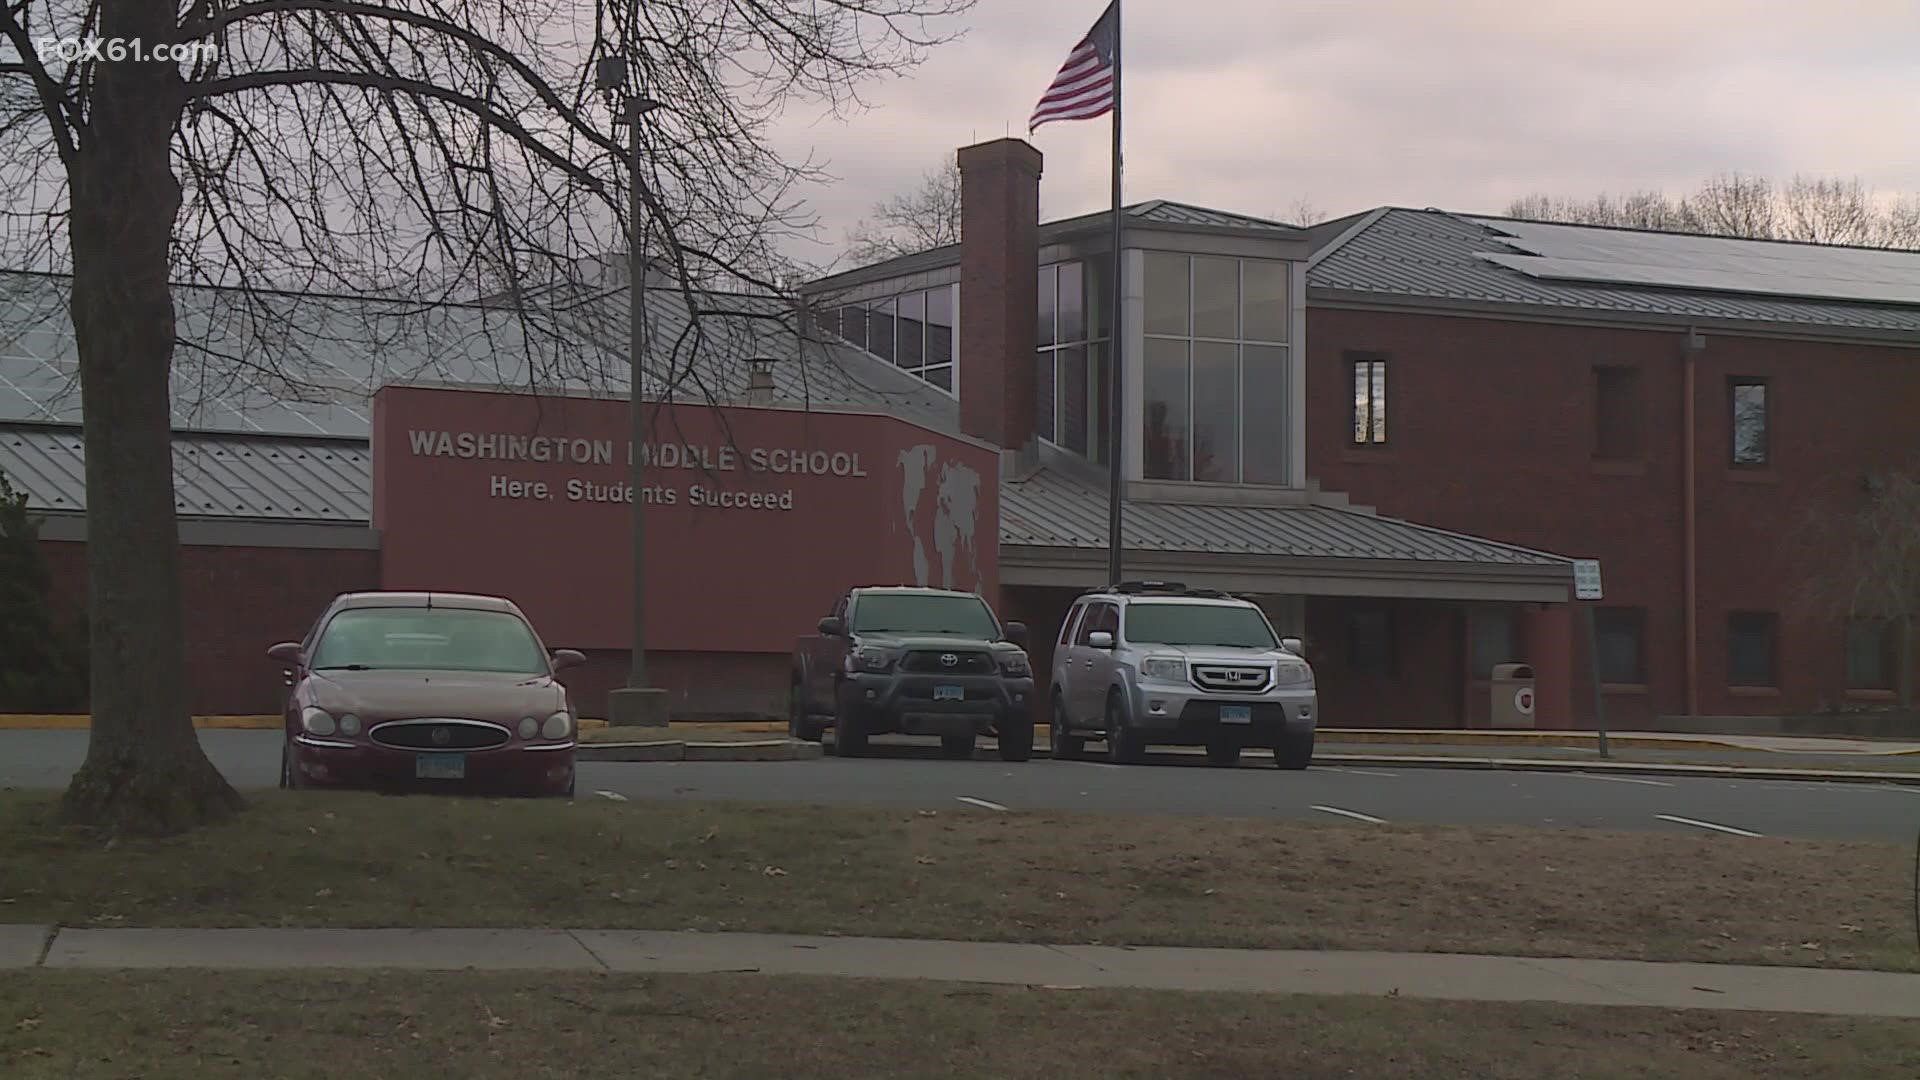 The report was "immediately investigated", which included an interview with the student. The student admitted to the allegation, Meriden school officials said.